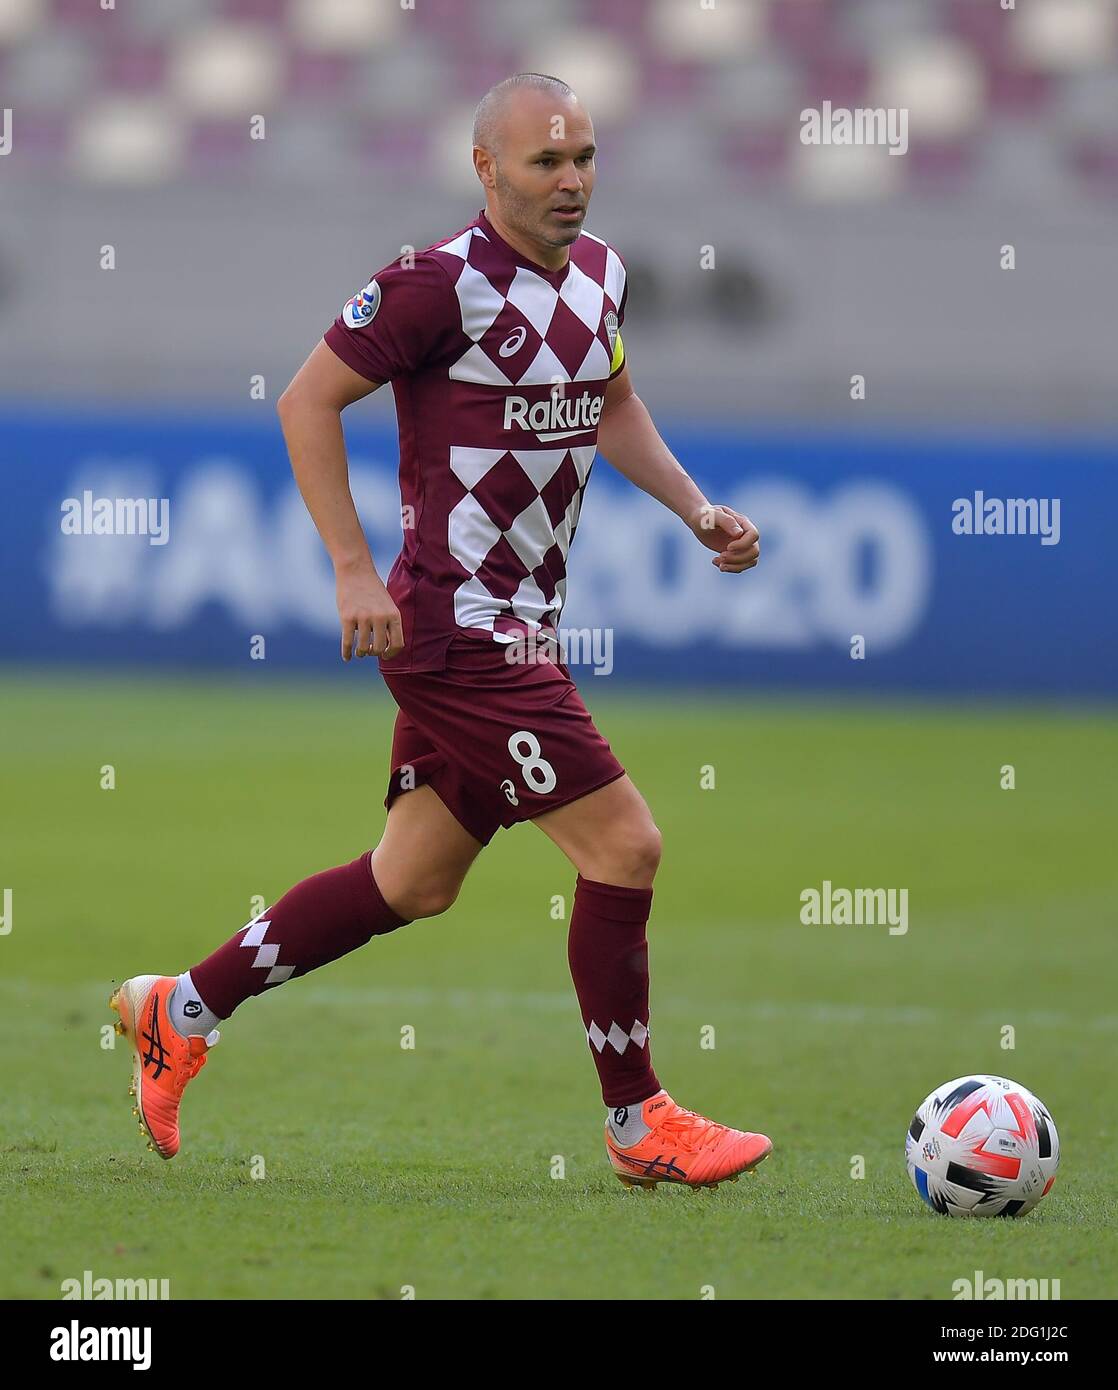 Doha, Qatar. 7th Dec, 2020. Andres Iniesta of Vissel Kobe competes during the round 16 match of the AFC Champions League between Shanghai SIPG FC of China and Vissel Kobe of Japan in Doha, Qatar, Dec. 7, 2020. Credit: Nikku/Xinhua/Alamy Live News Stock Photo